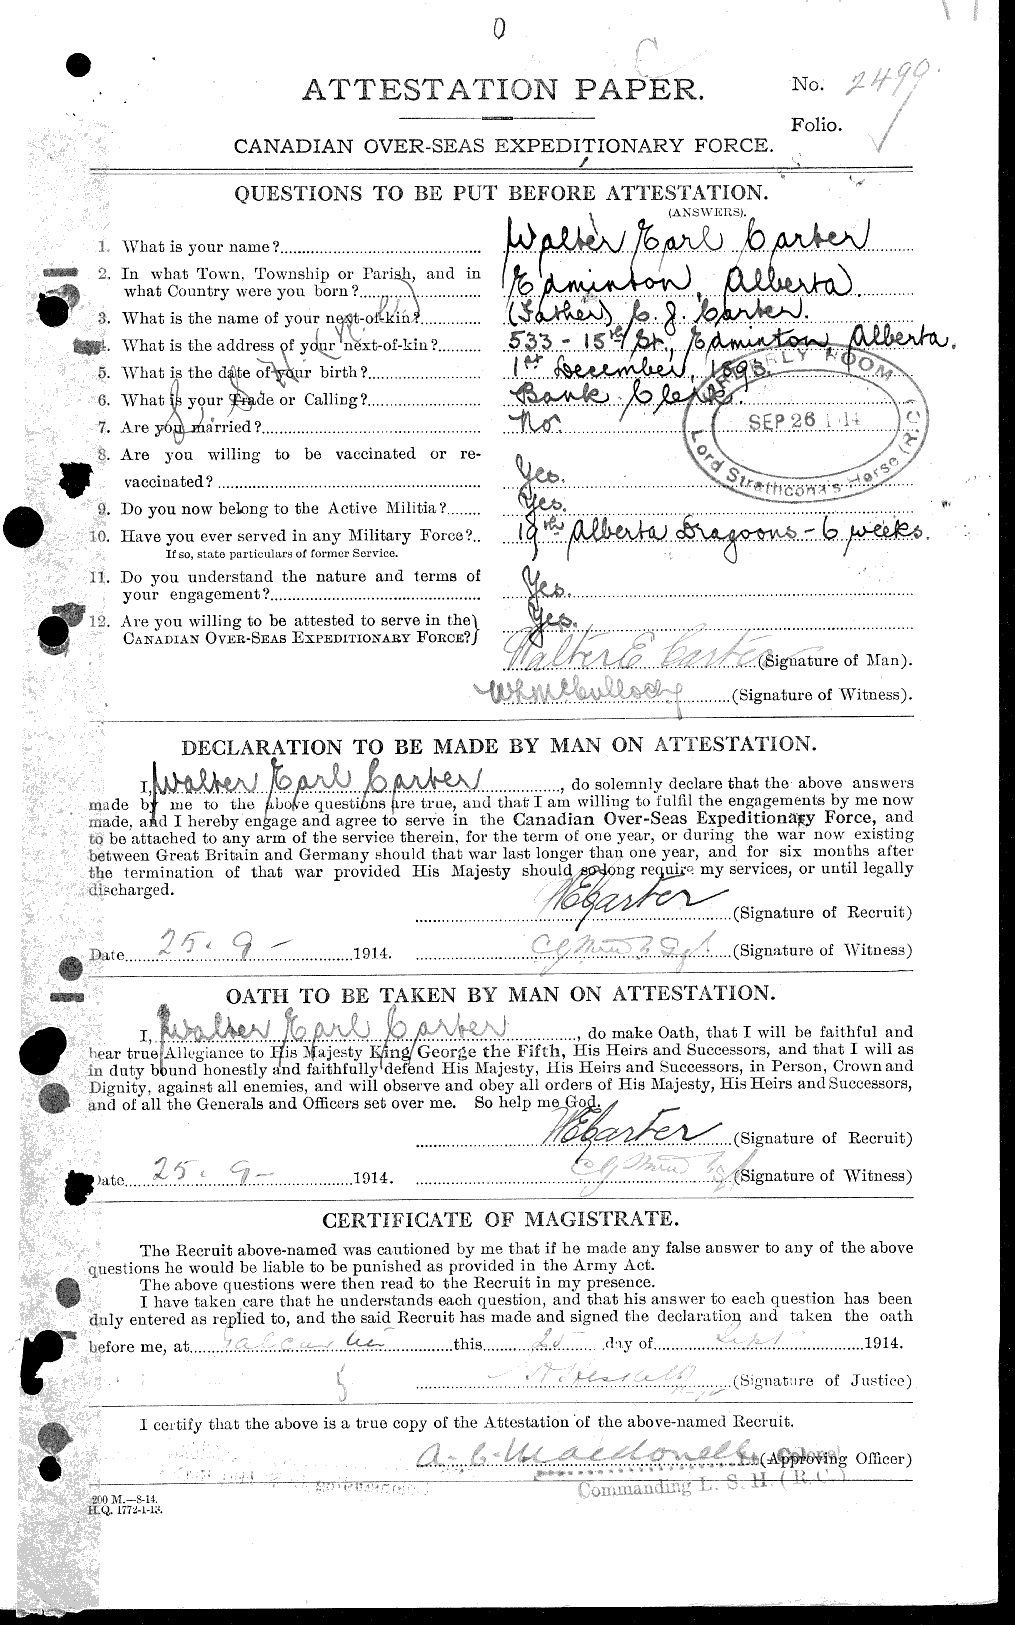 Personnel Records of the First World War - CEF 012471a